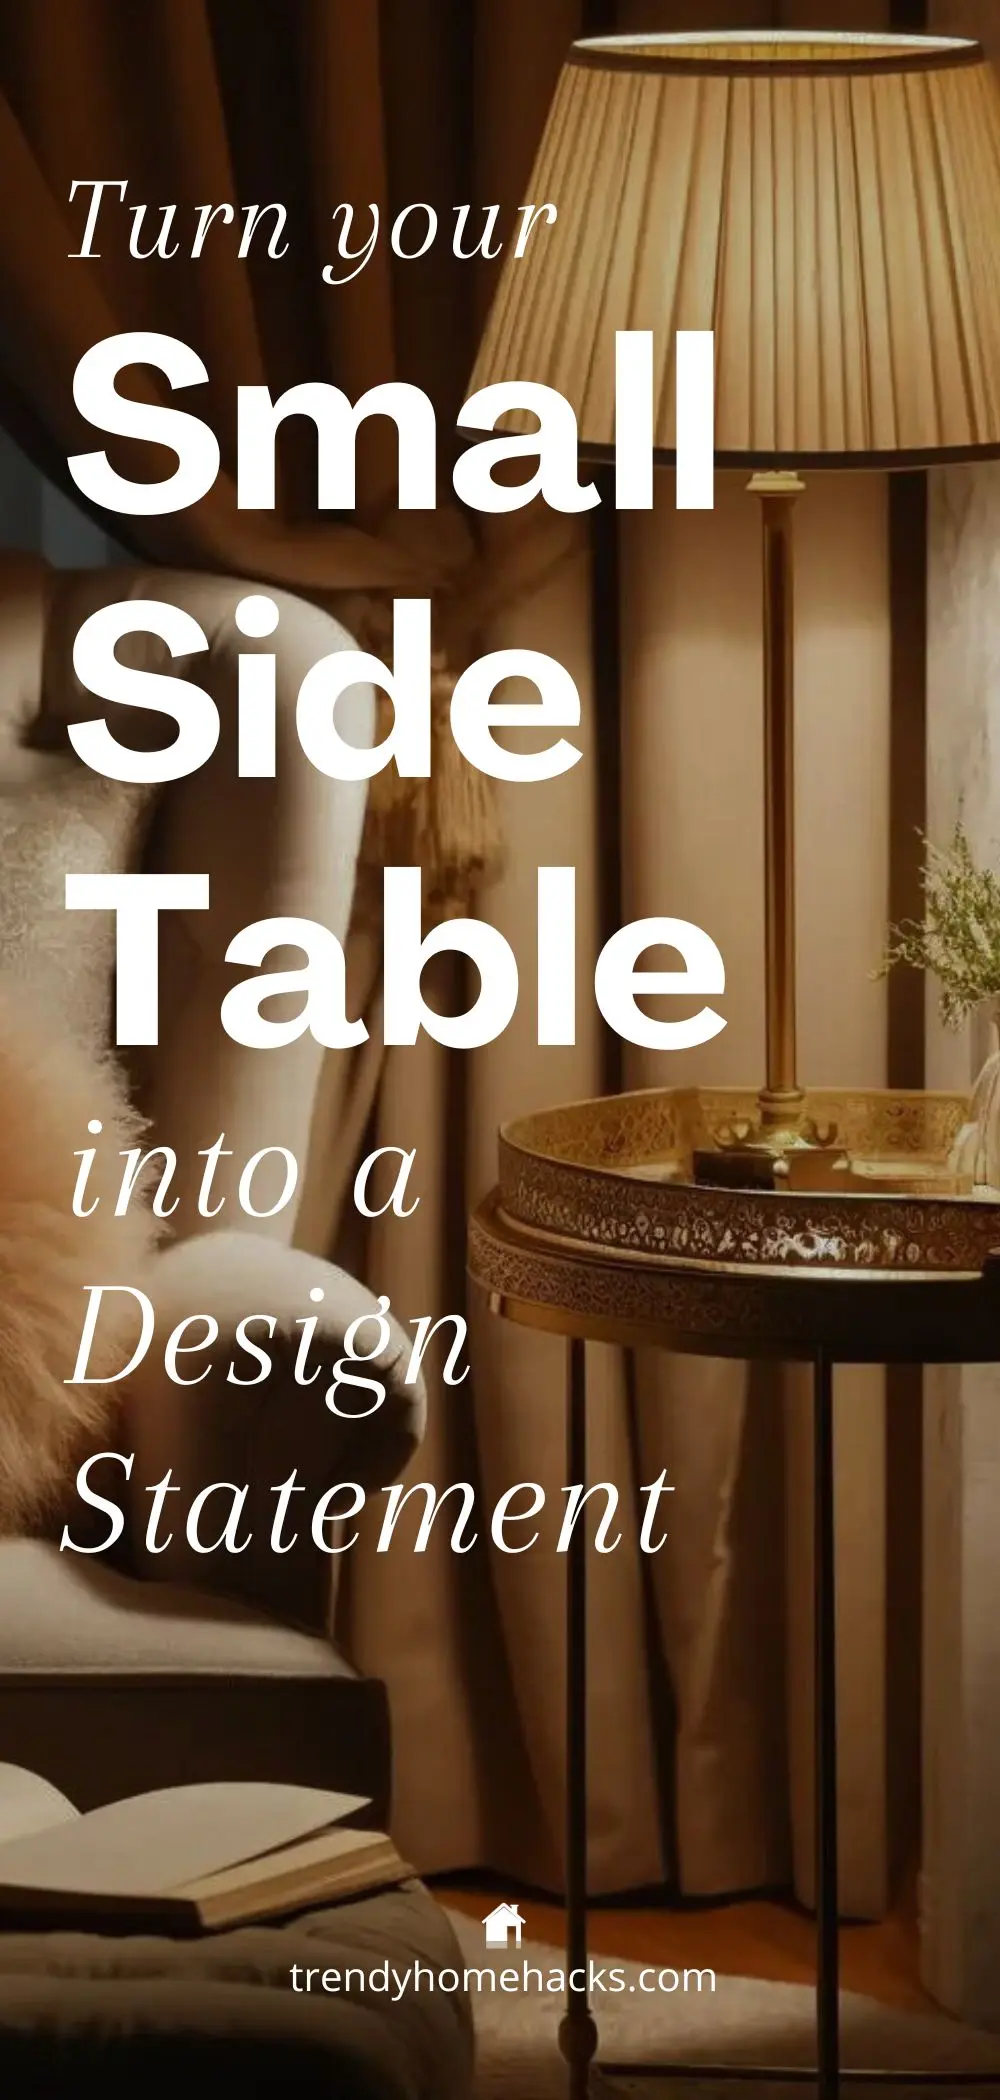 a tal Pinterest pin that reads 'turn your small side table into a design statement' while displaying a reading nook side table with a table lamp is a great way to share this topic on social media.